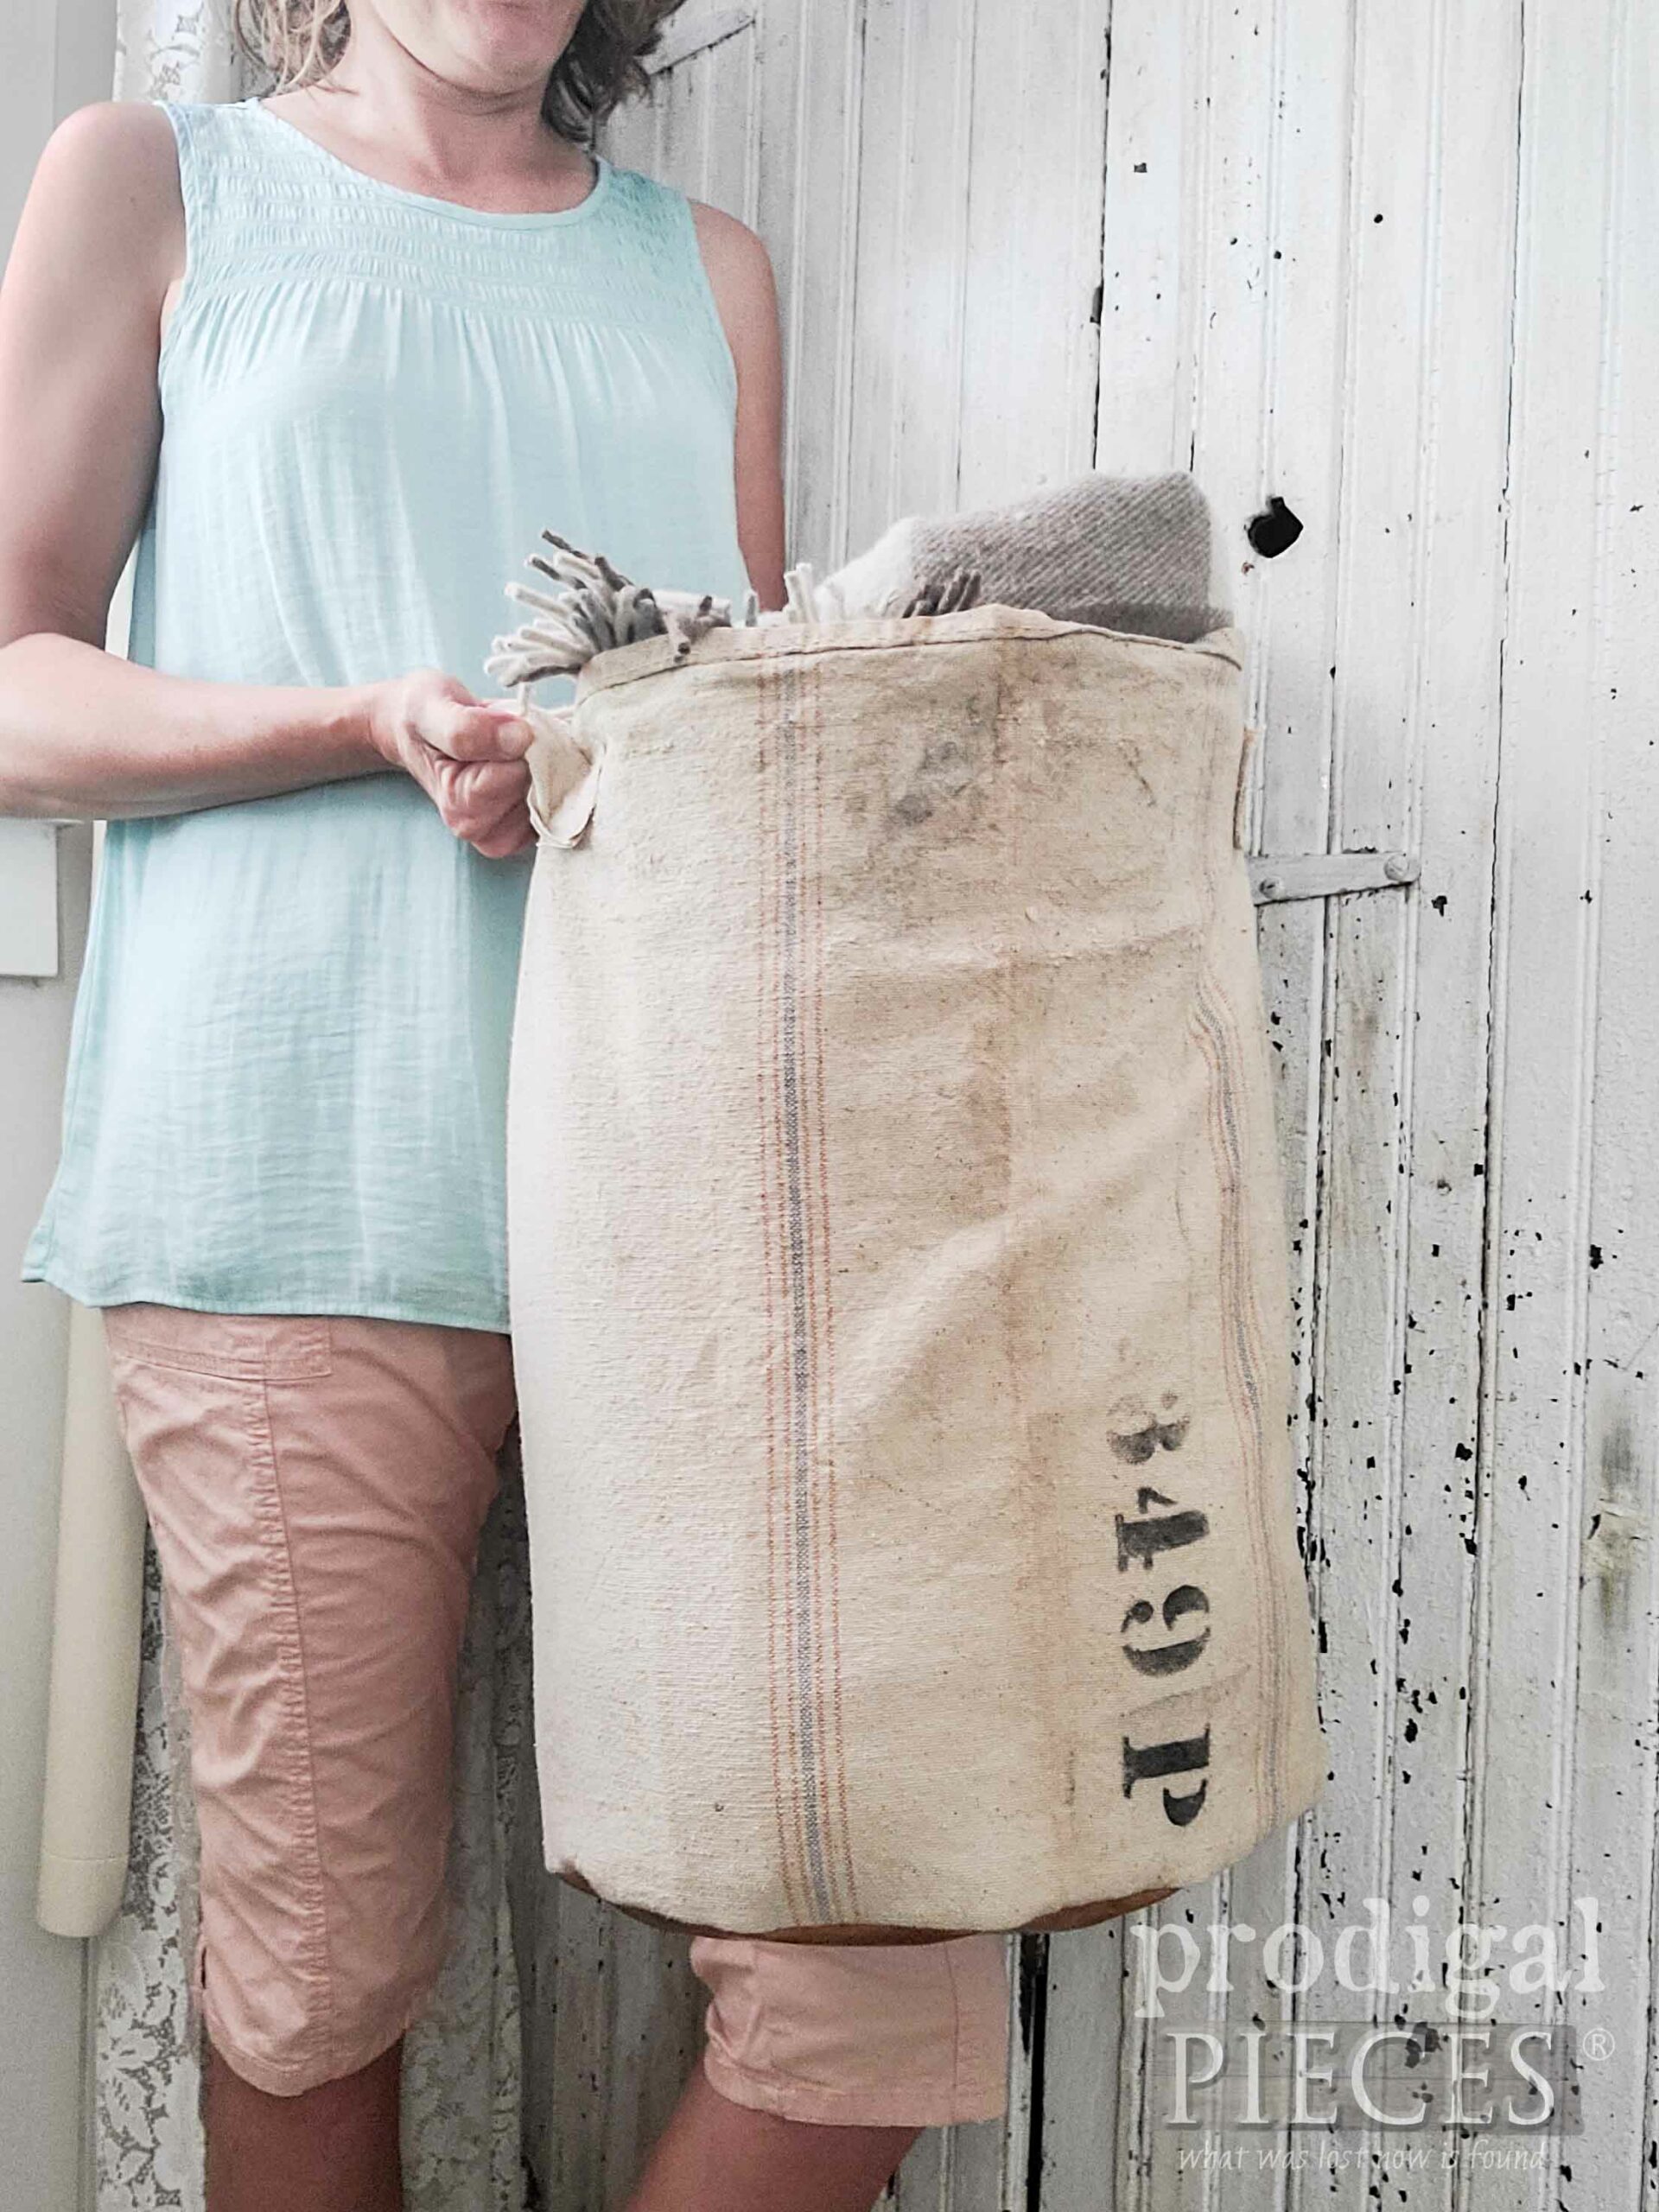 Larissa of Prodigal Pieces with Antique Feed Sack Bucket | shop.prodigalpieces.com #prodigalpieces